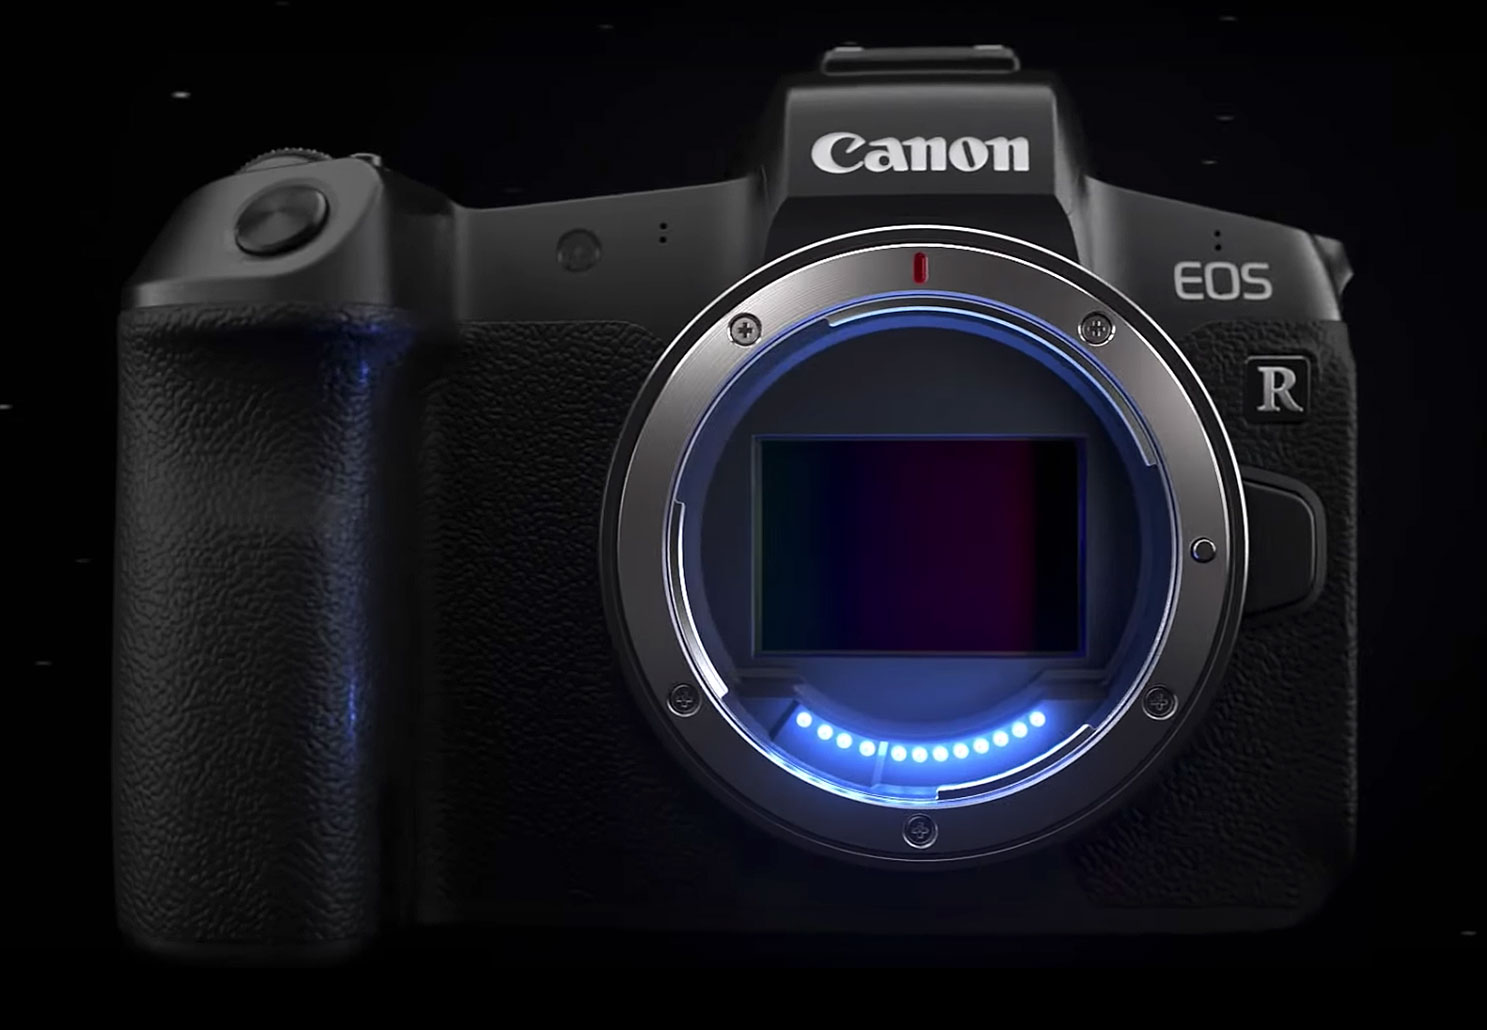 The Canon Eos R System - R System Lens Canon - HD Wallpaper 